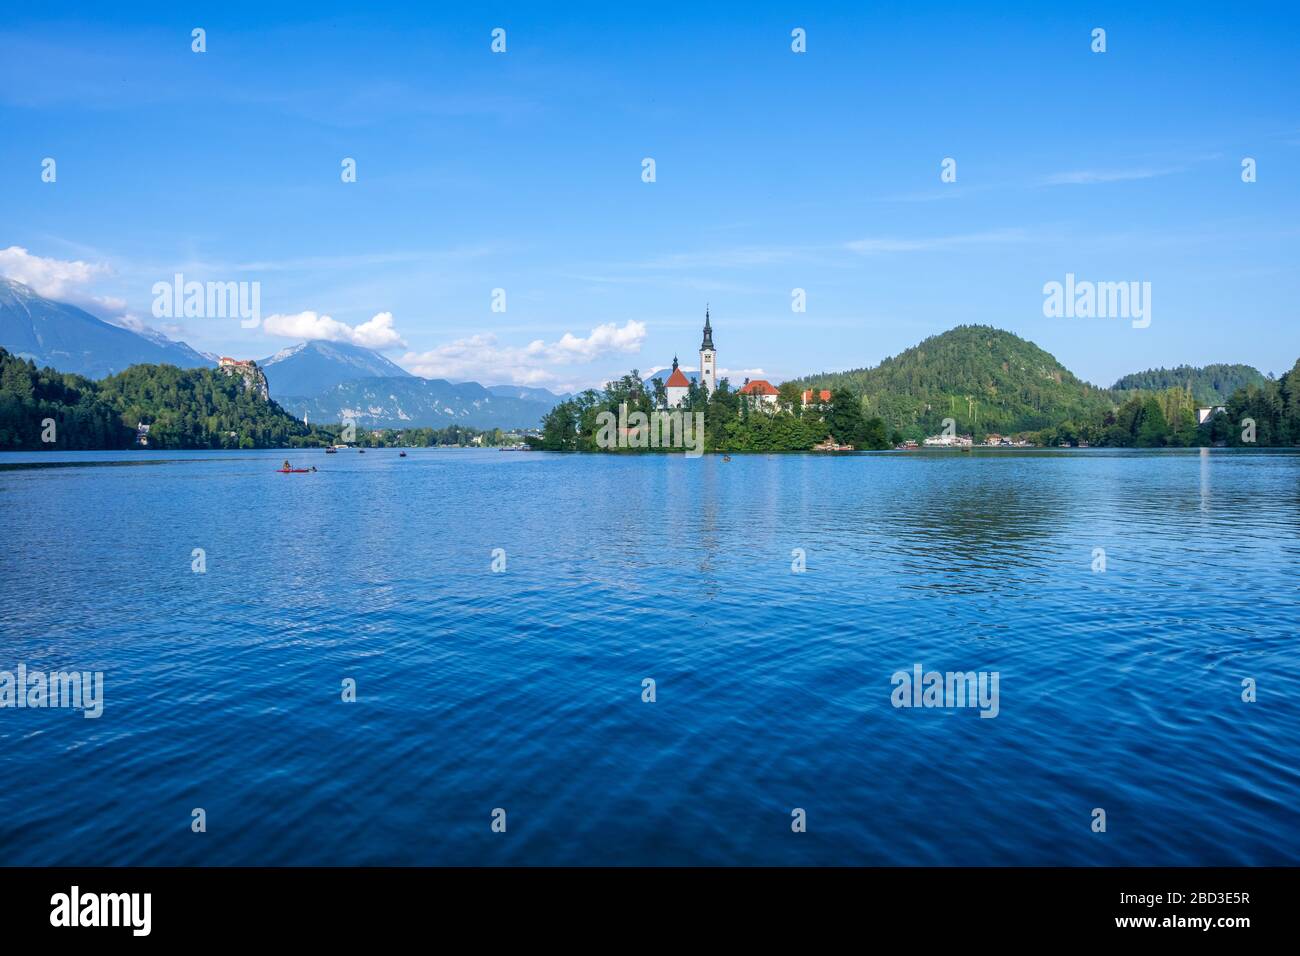 Amazing view on Bled Lake with church dedicated to the Assumption of Mary on a small island, Julian Alps, Slovenia Stock Photo